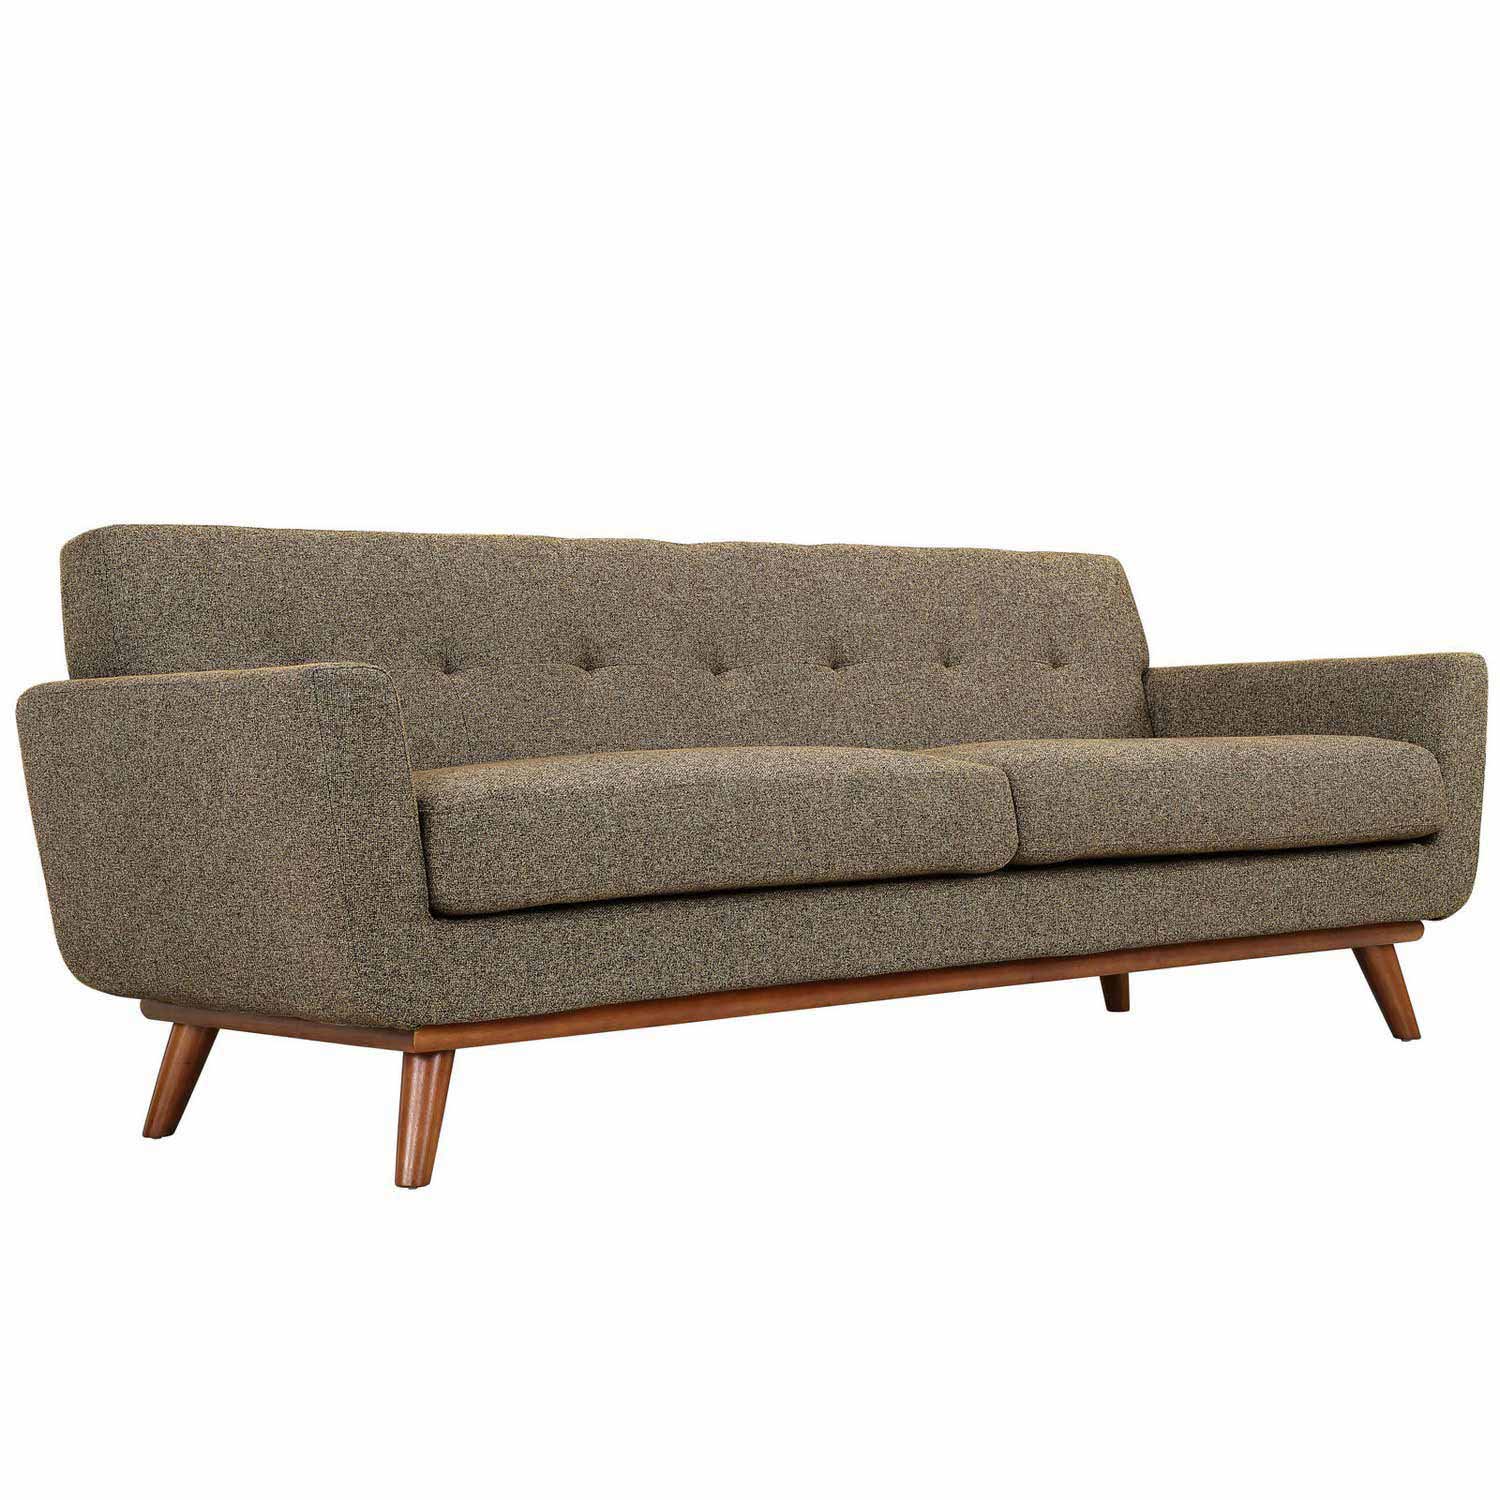 Modway Engage Loveseat and Sofa Set of 2 - Oat